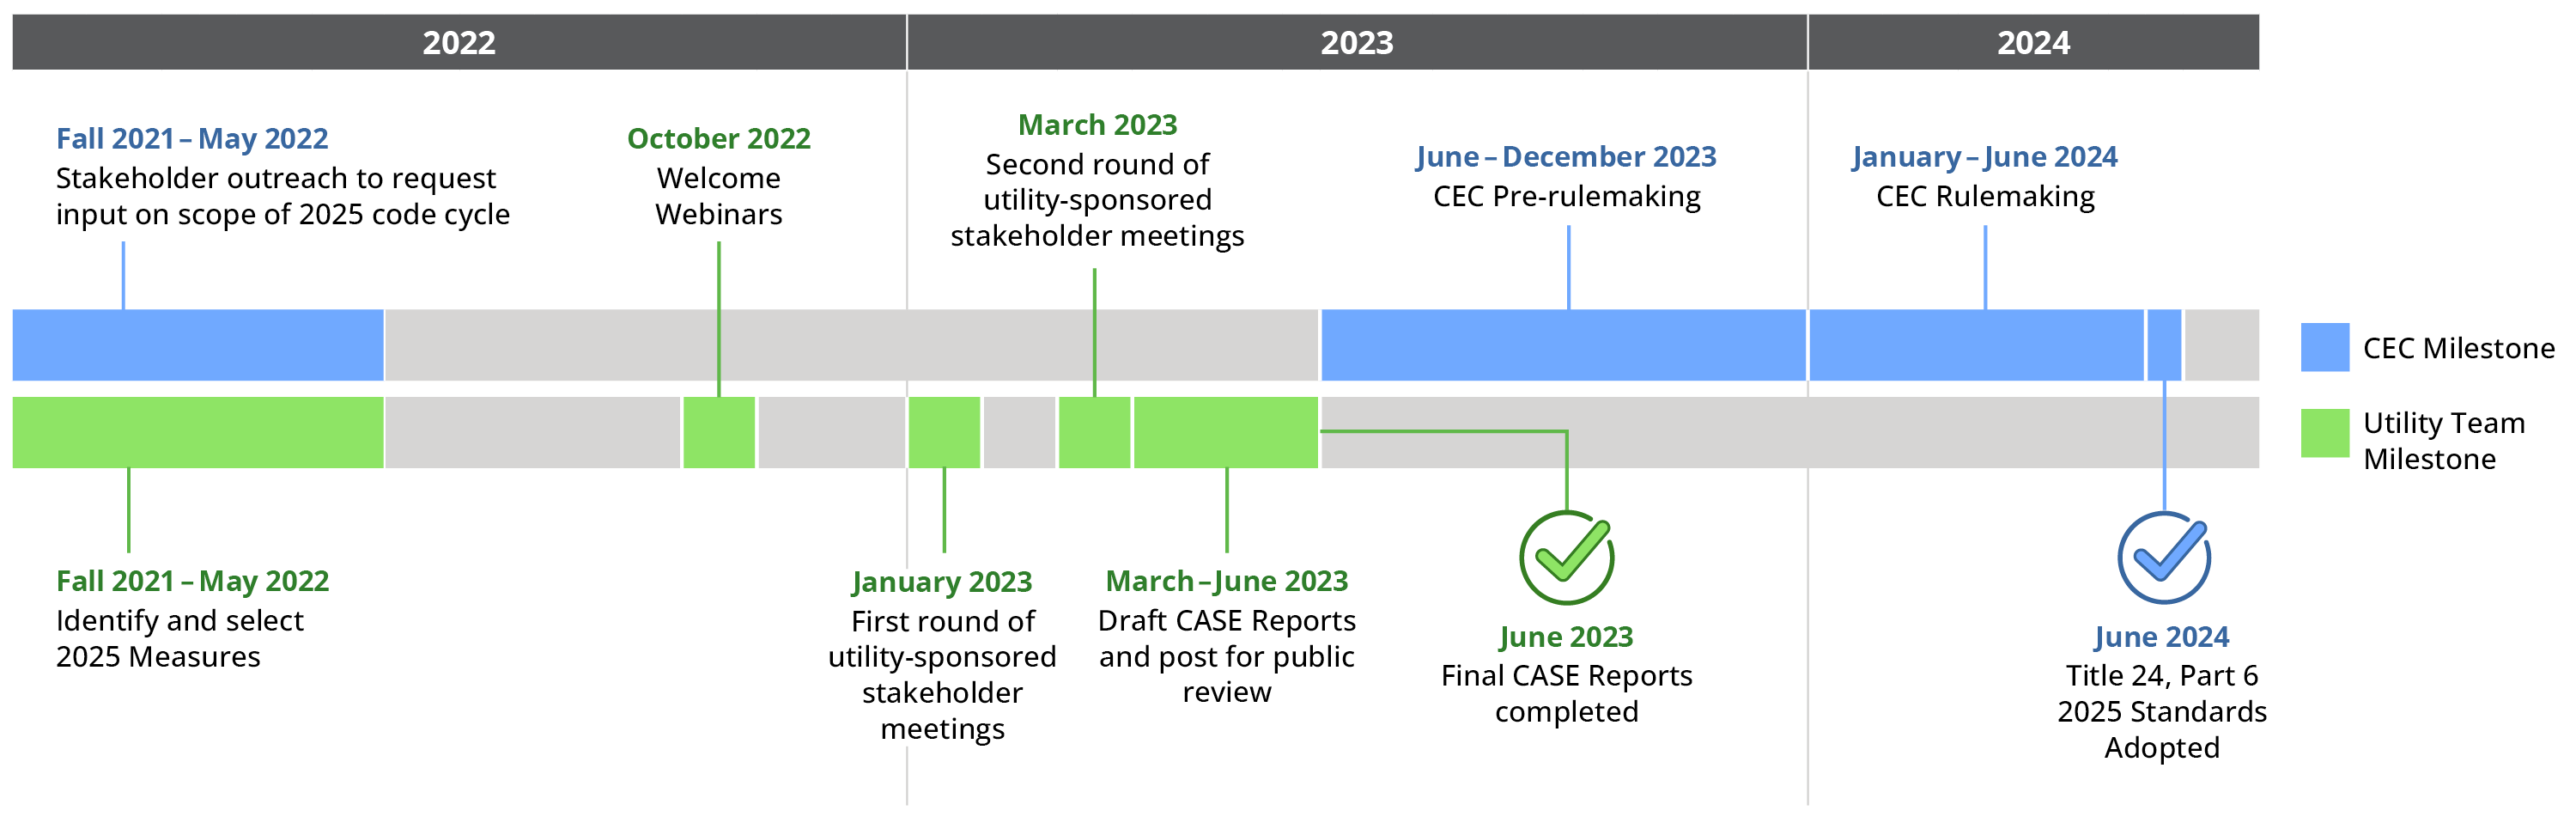 2025-cycle-timeline-and-key-milestones-title-24-stakeholders